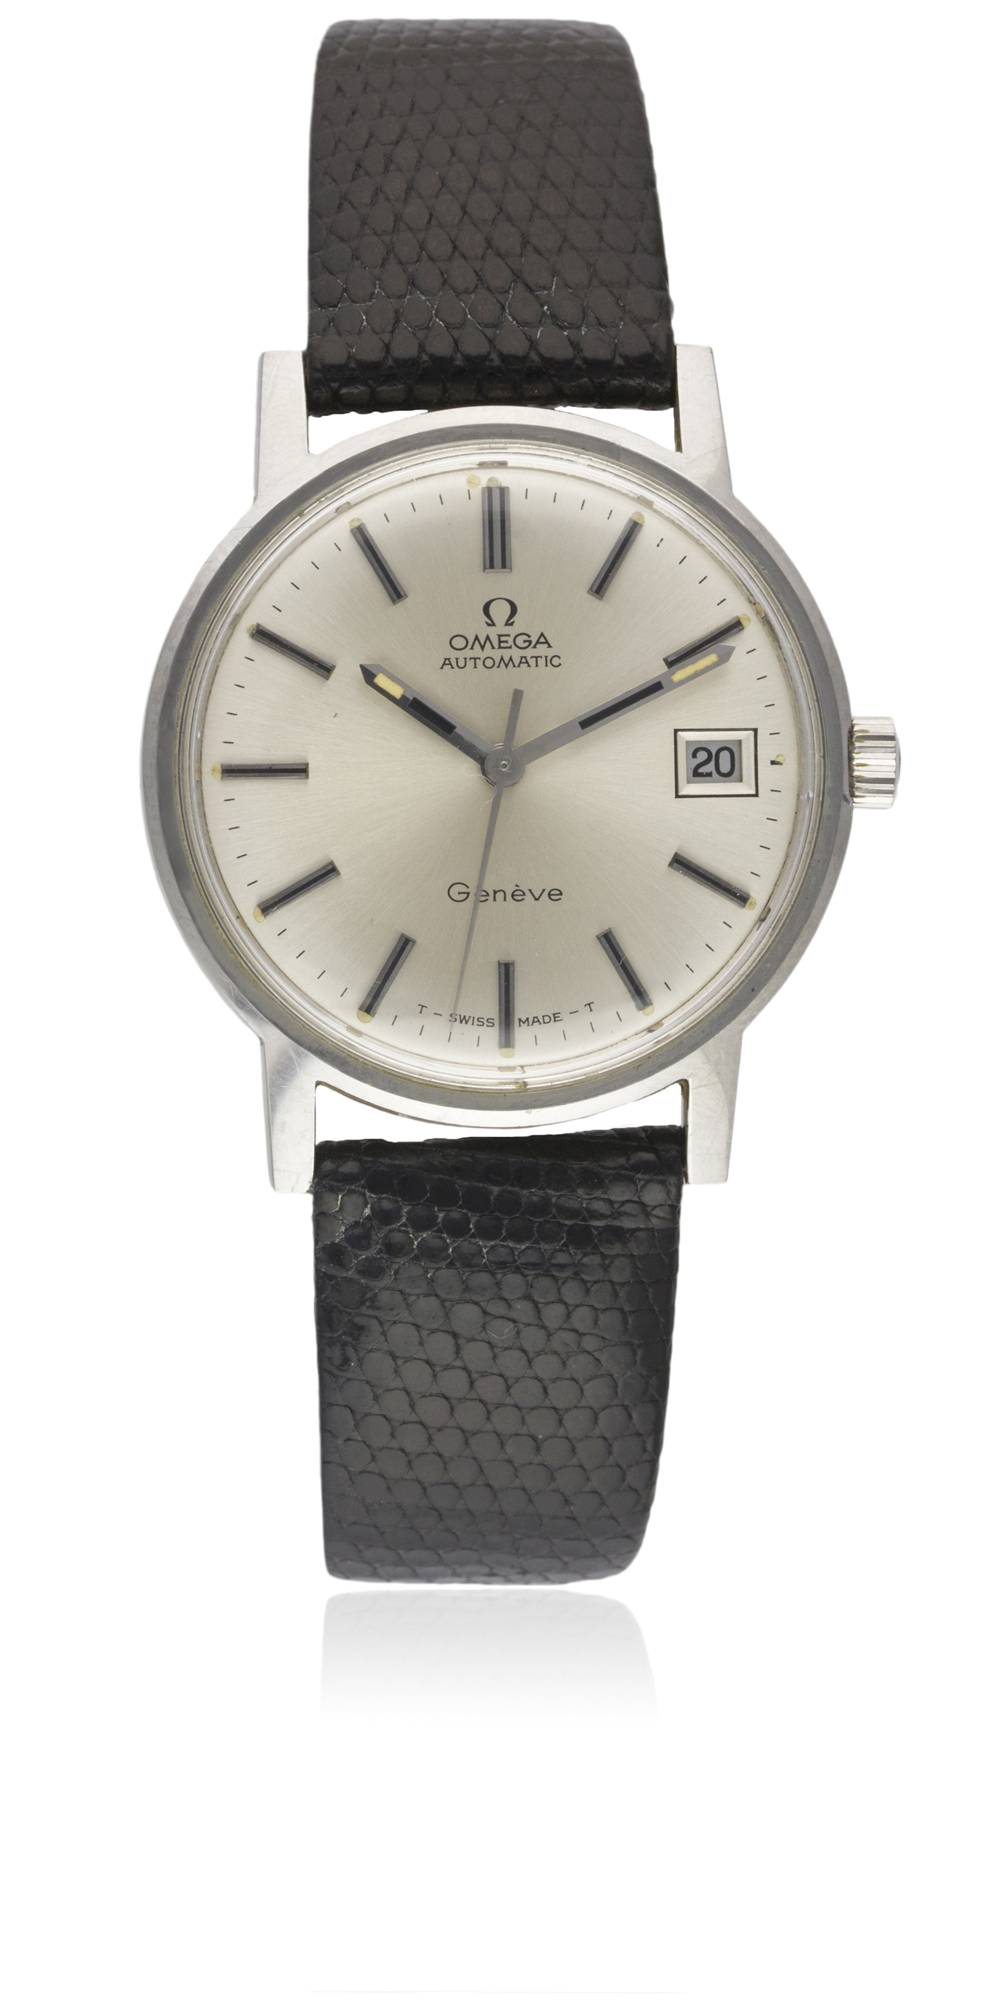 A GENTLEMAN'S STAINLESS STEEL OMEGA GENEVE AUTOMATIC WRIST WATCH CIRCA 1971, REF. 166.070 WITH OMEGA - Image 2 of 2